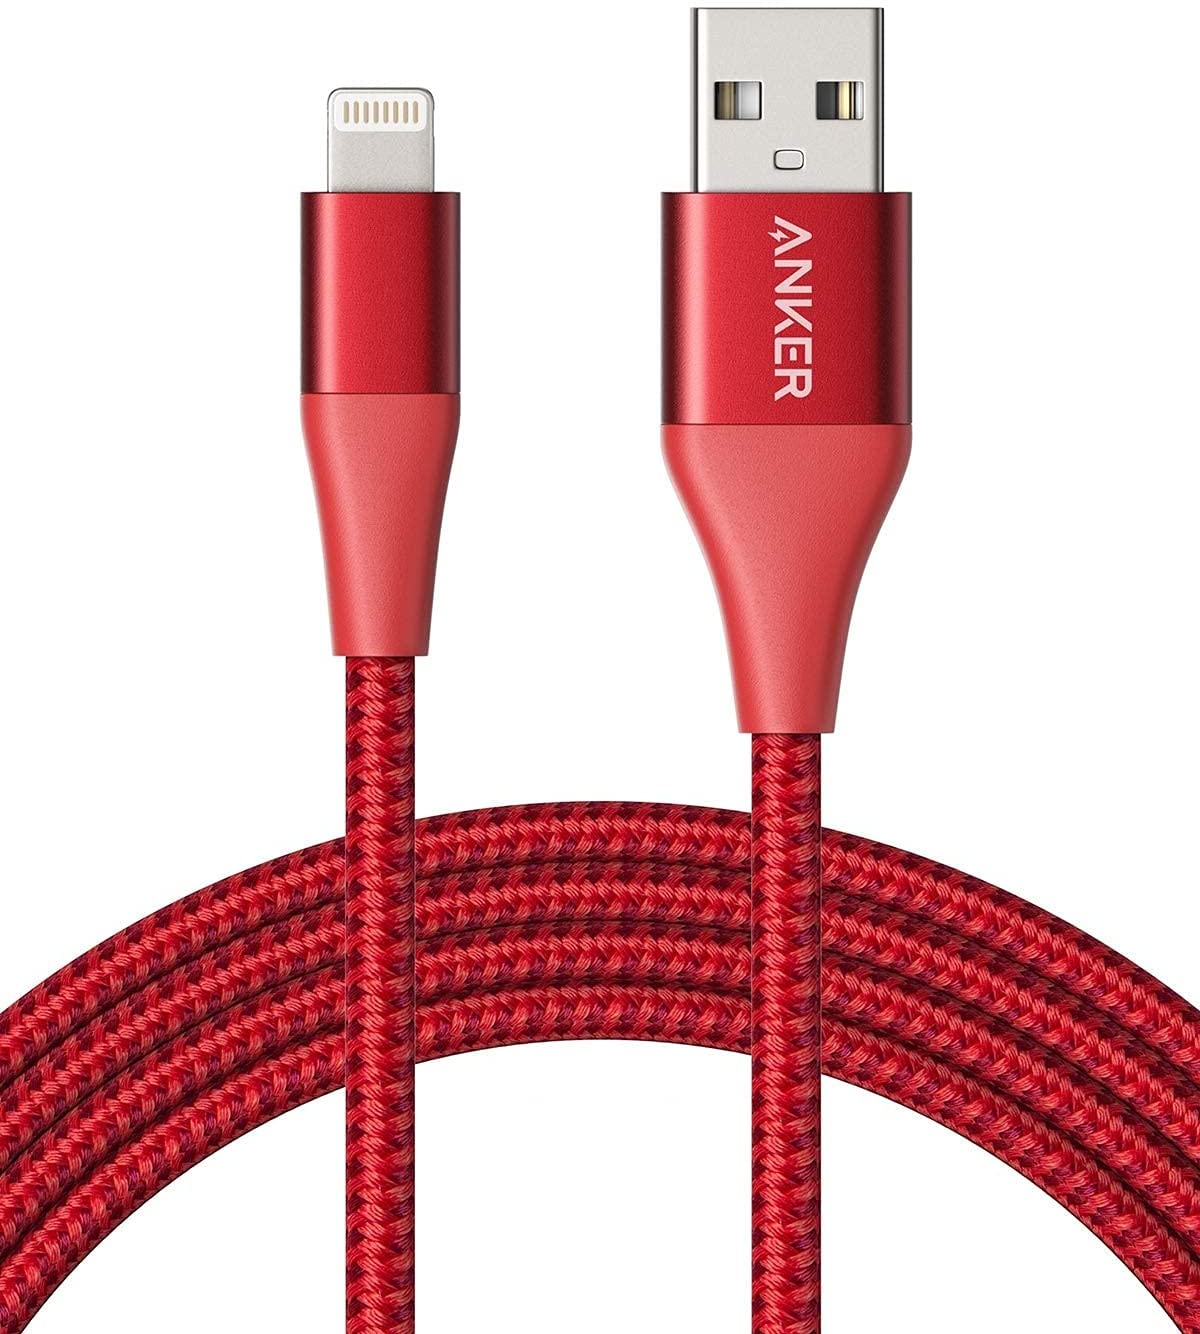 Anker Powerline+ II Lightning Cable (6ft), MFi Certified for Flawless